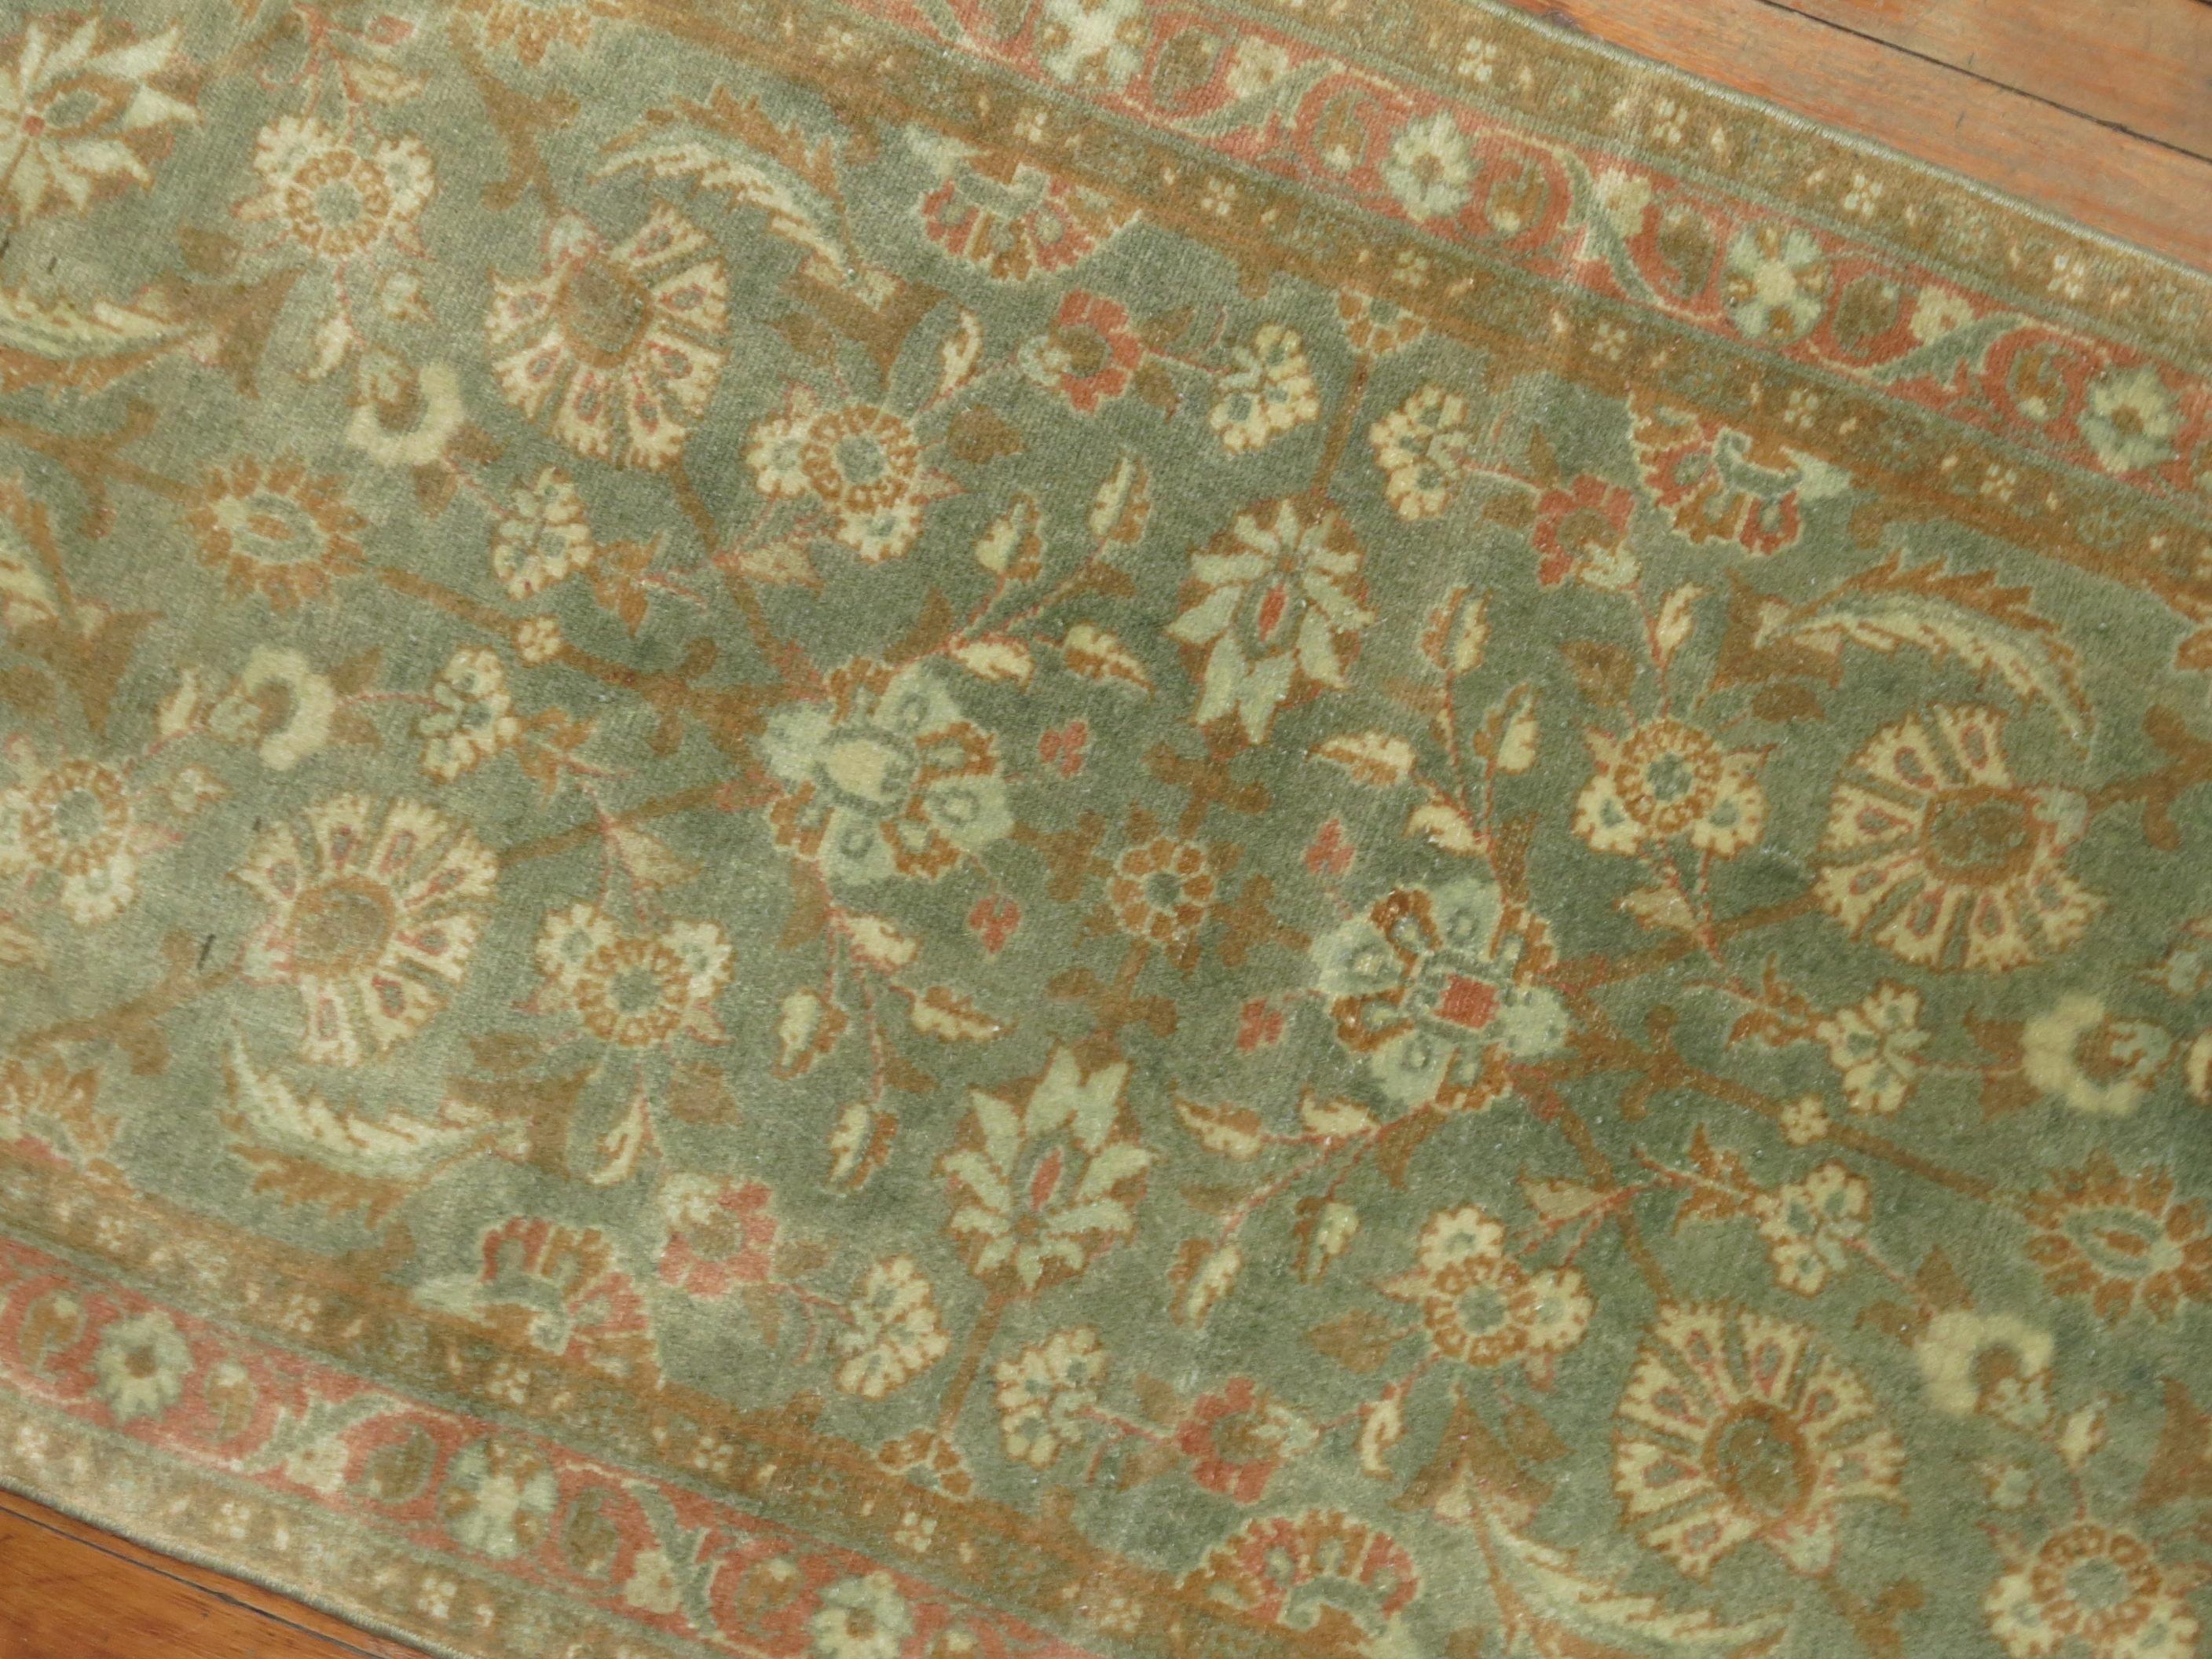 Decorative Persian antique Tabriz one-of-a-kind antique narrow runner from the 1940s in brown and green.

Measures: 2'4” x 14'.